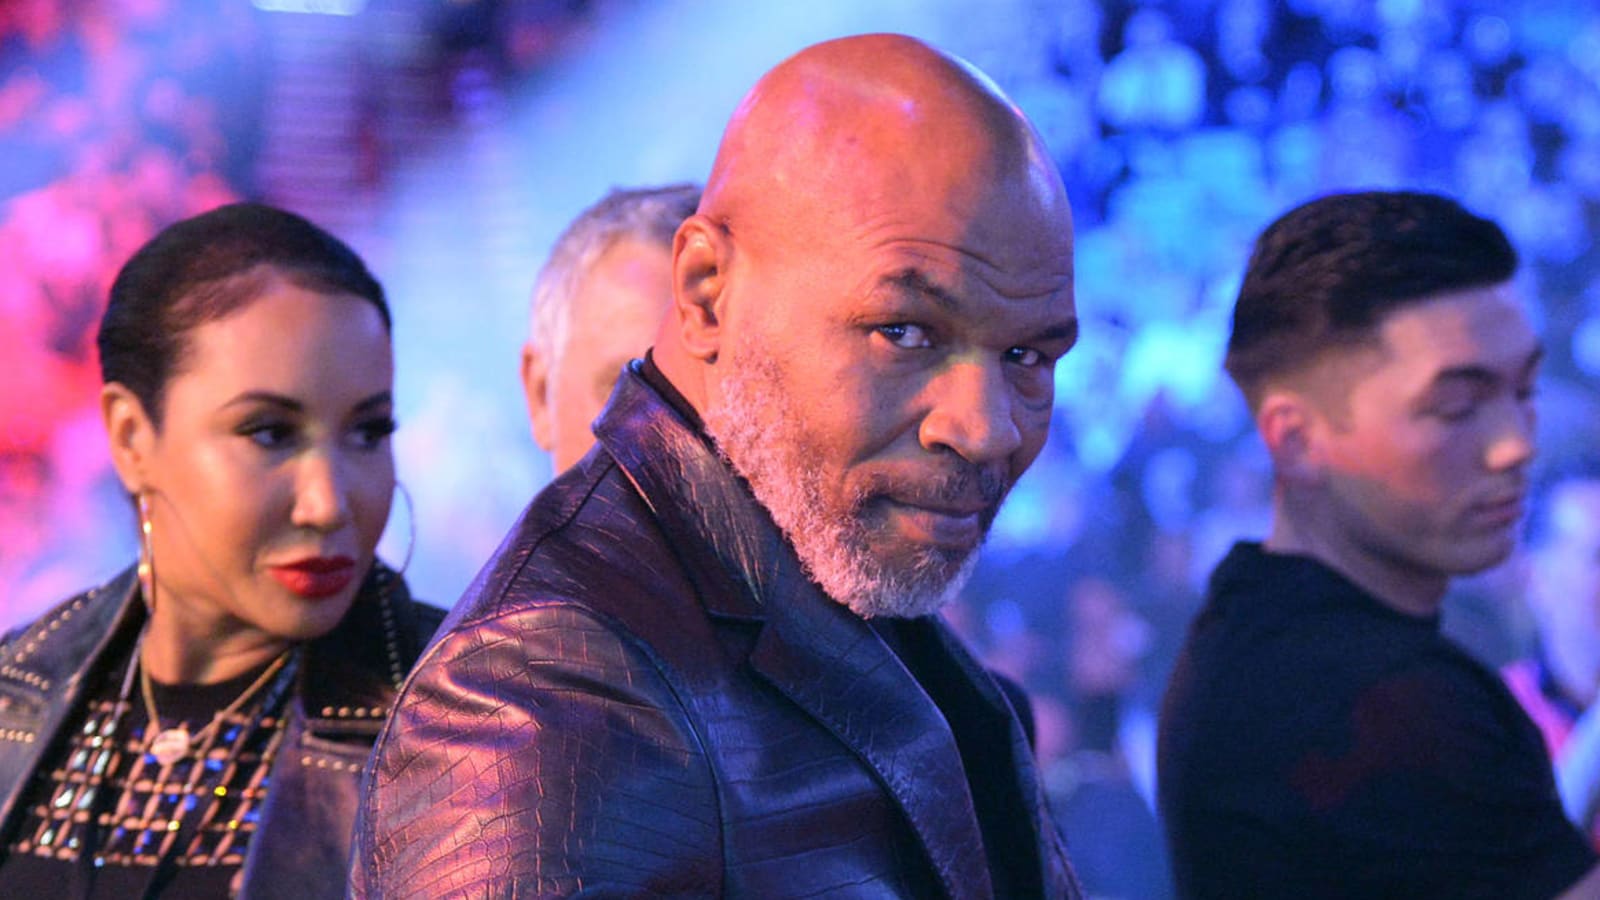 Mike Tyson offered $20M to take part in bare-knuckle boxing bout